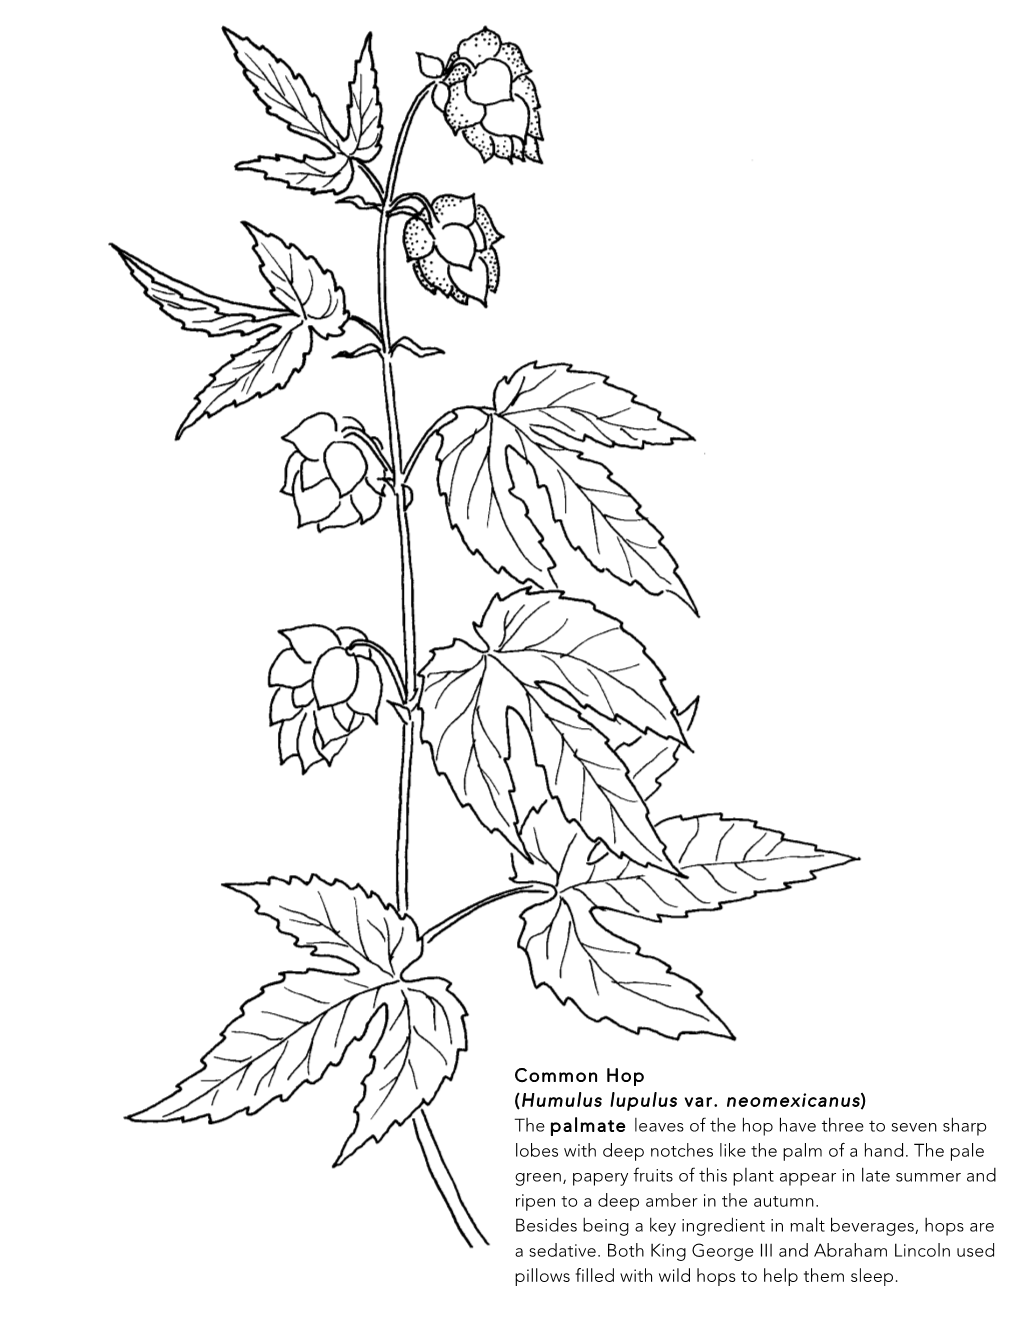 Common Hop (Humulus Lupulus Var. Neomexicanus) the Palmate Leaves of the Hop Have Three to Seven Sharp Lobes with Deep Notches Like the Palm of a Hand